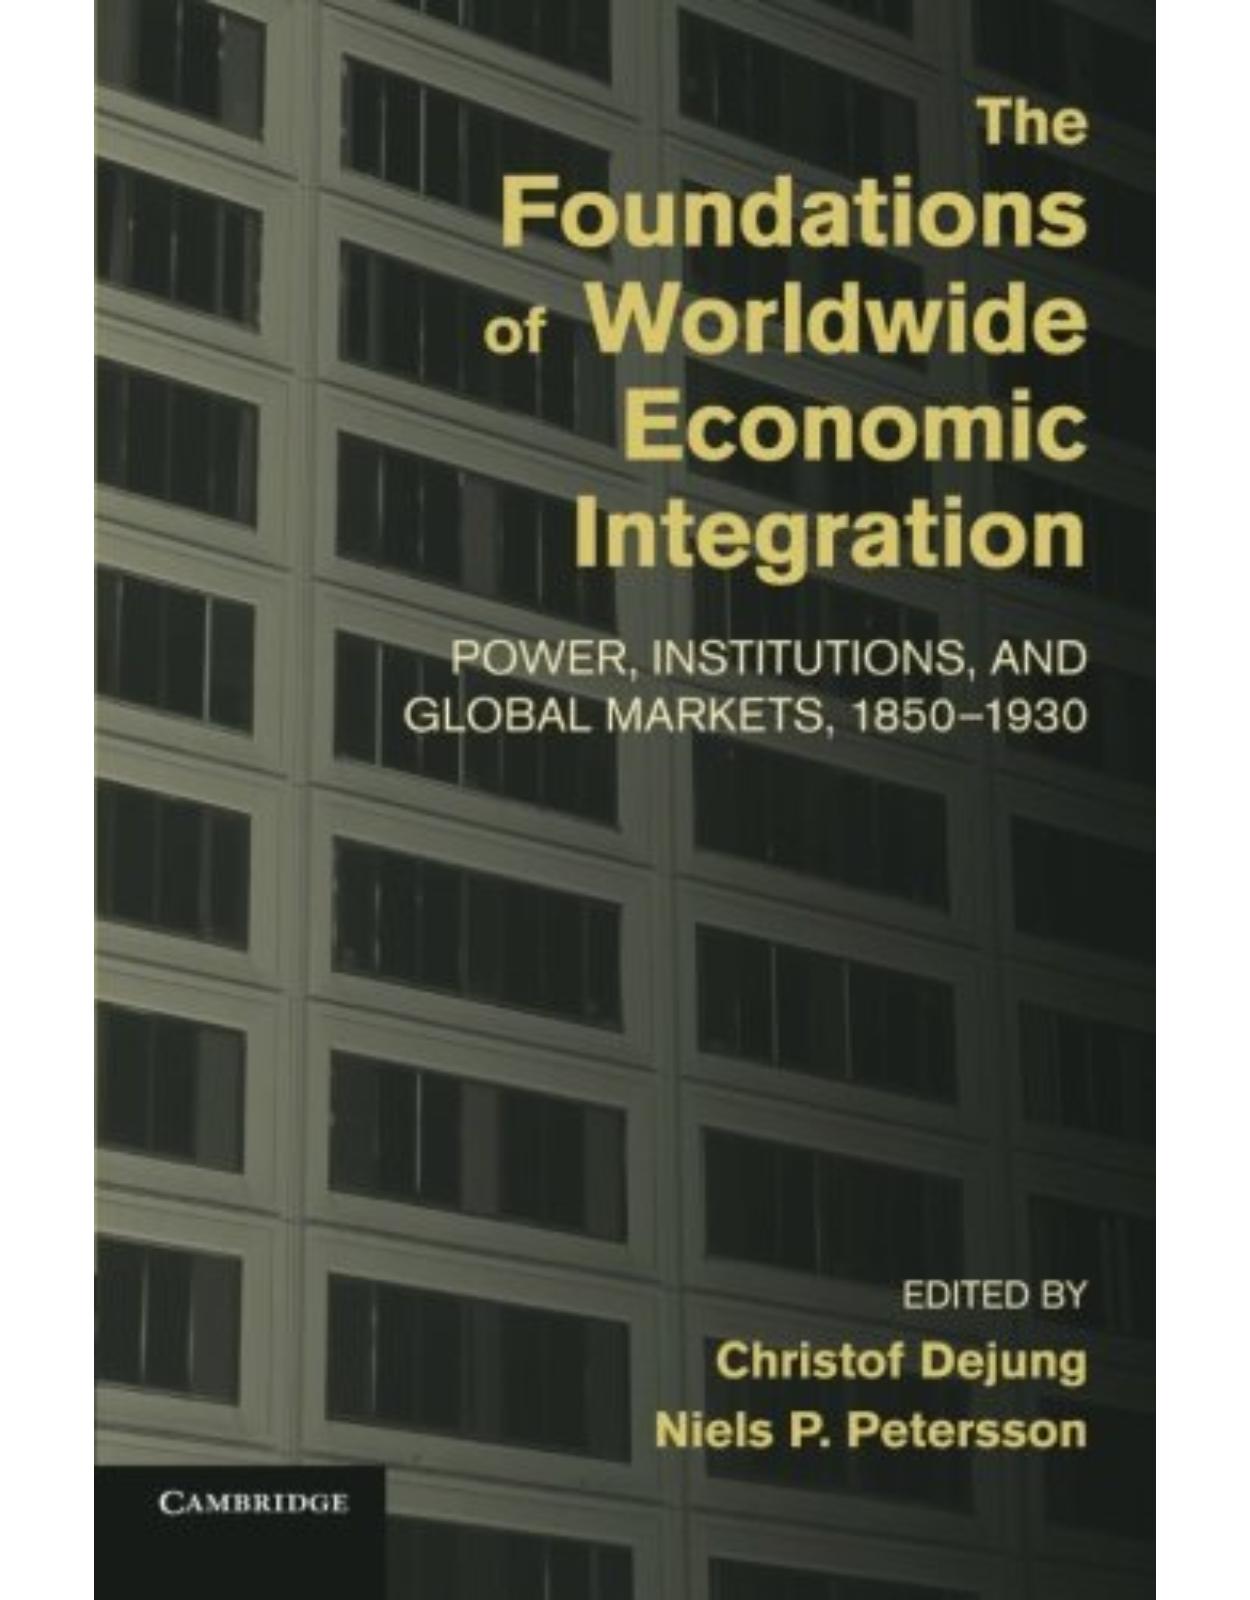 The Foundations of Worldwide Economic Integration: Power, Institutions, and Global Markets, 1850-1930 (Cambridge Studies in the Emergence of Global Enterprise)